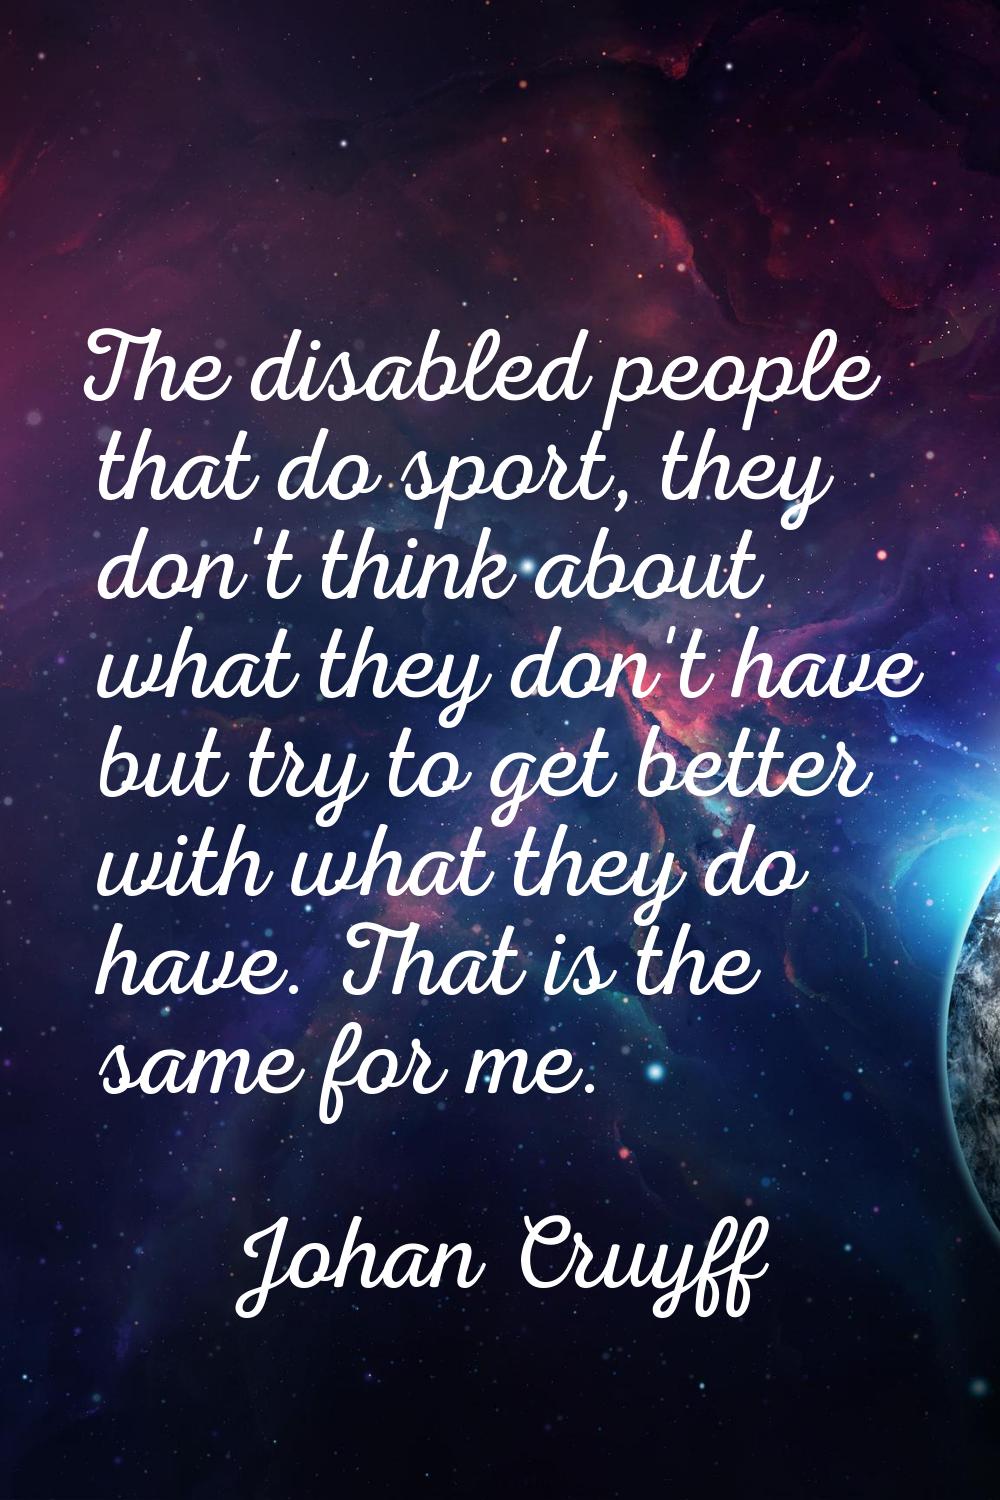 The disabled people that do sport, they don't think about what they don't have but try to get bette